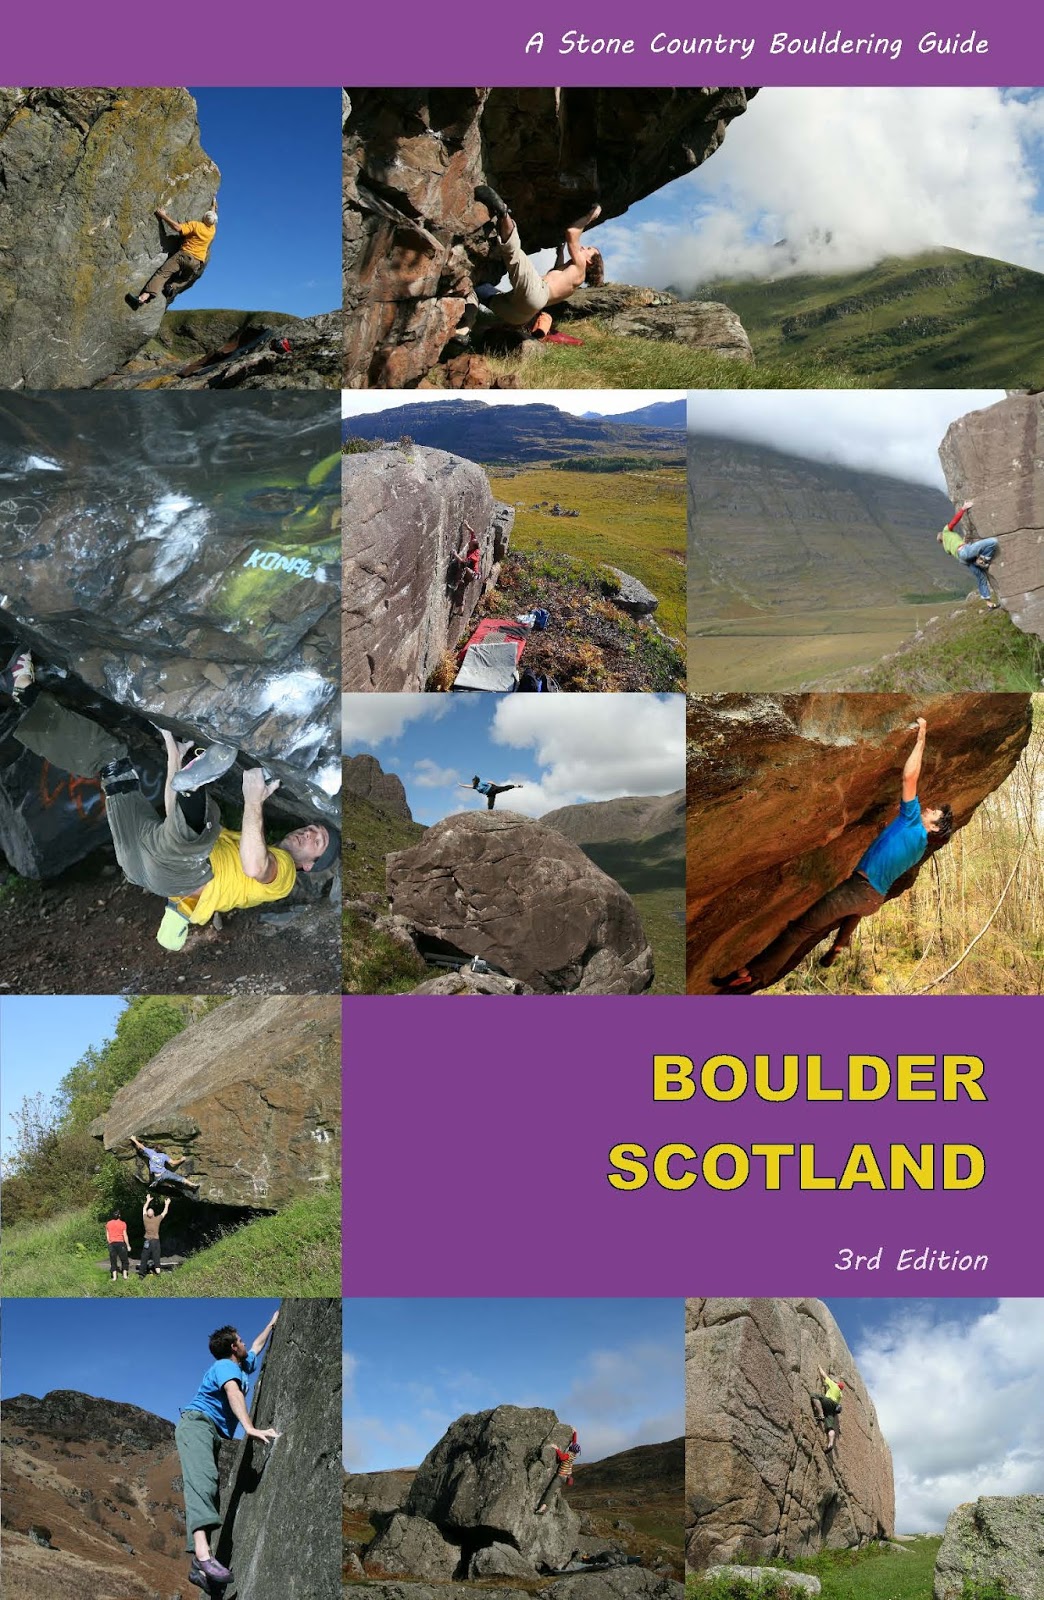 Scottish Bouldering #New Glasgow climbing wall: The Prop Store